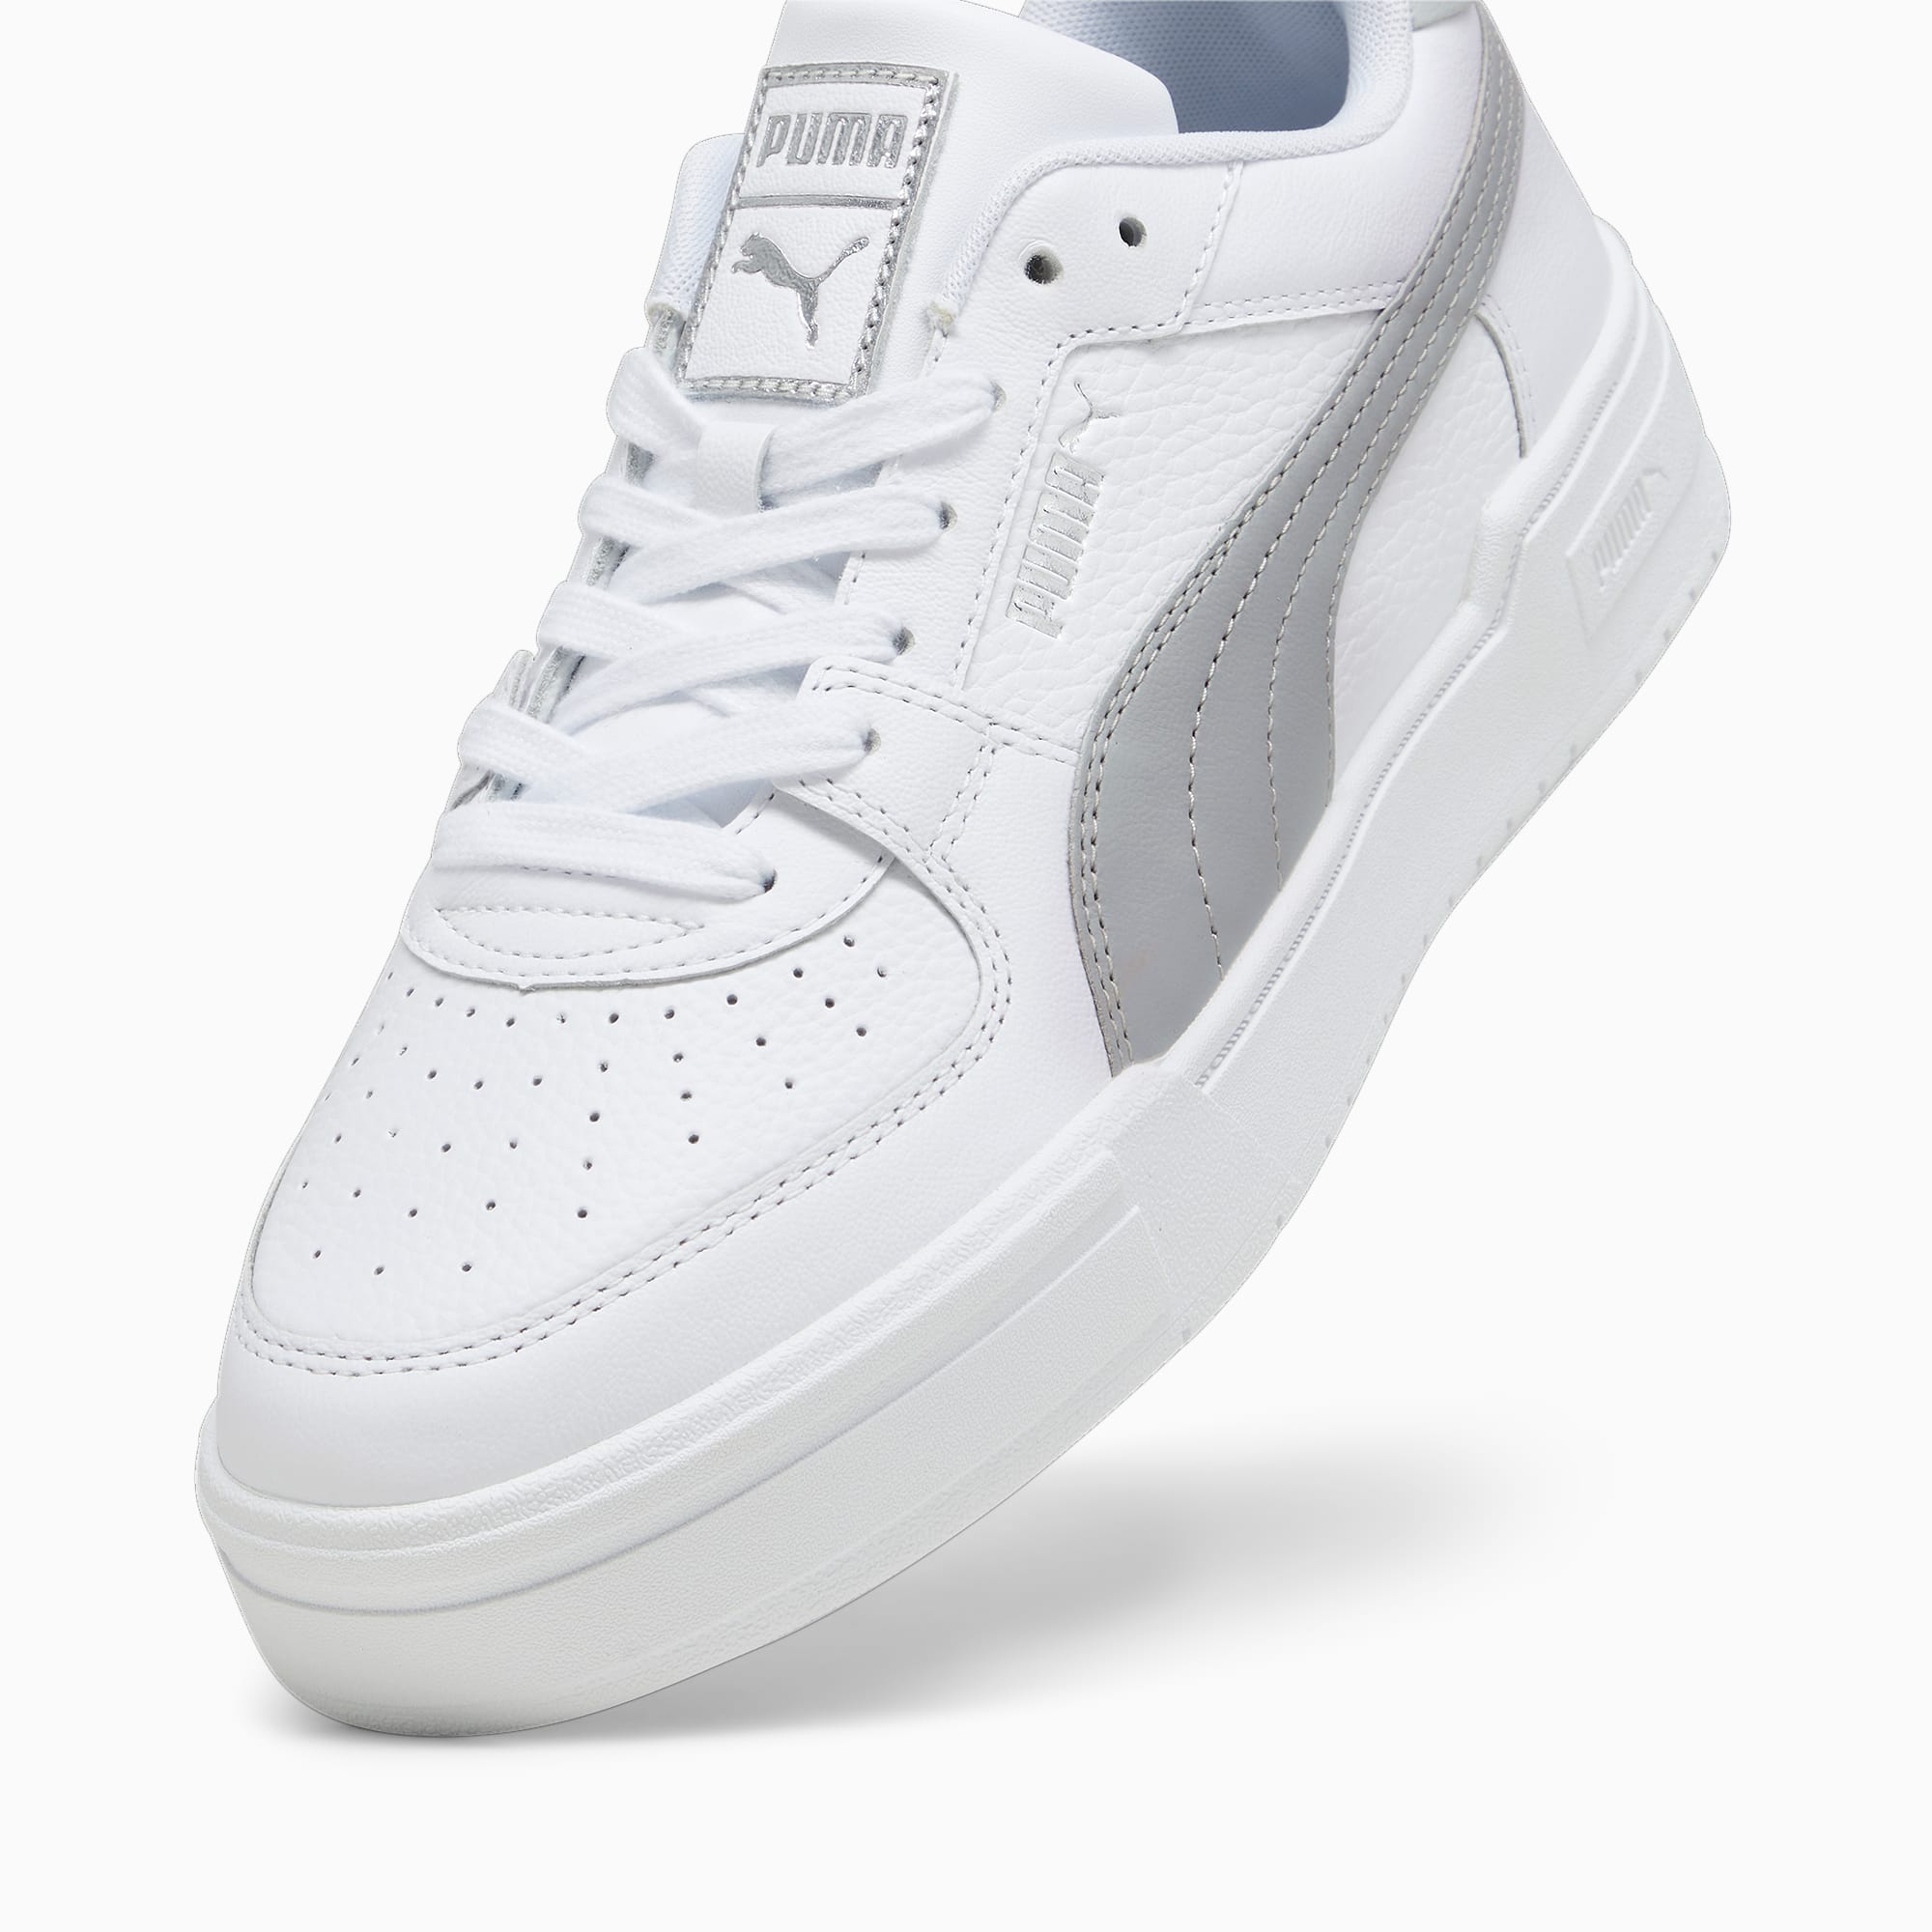 Women's PUMA Ca Pro Classic Trainers, White/Cool Light Grey, Size 37,5, Shoes